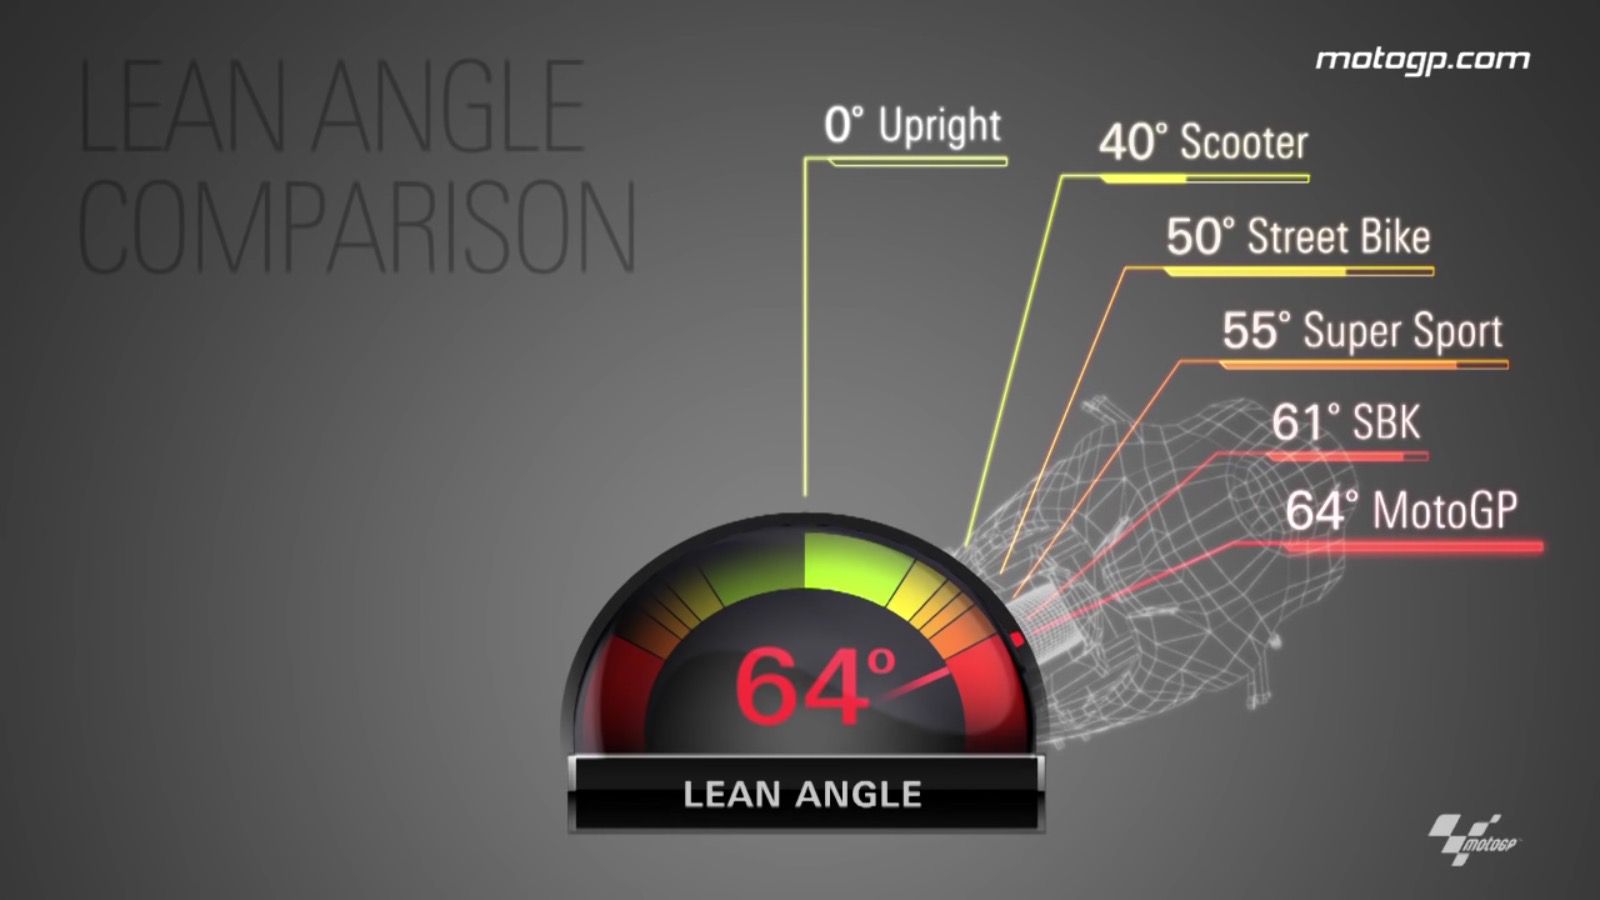 a graphic showing the relative lean angles achievable by different types of motorcycles